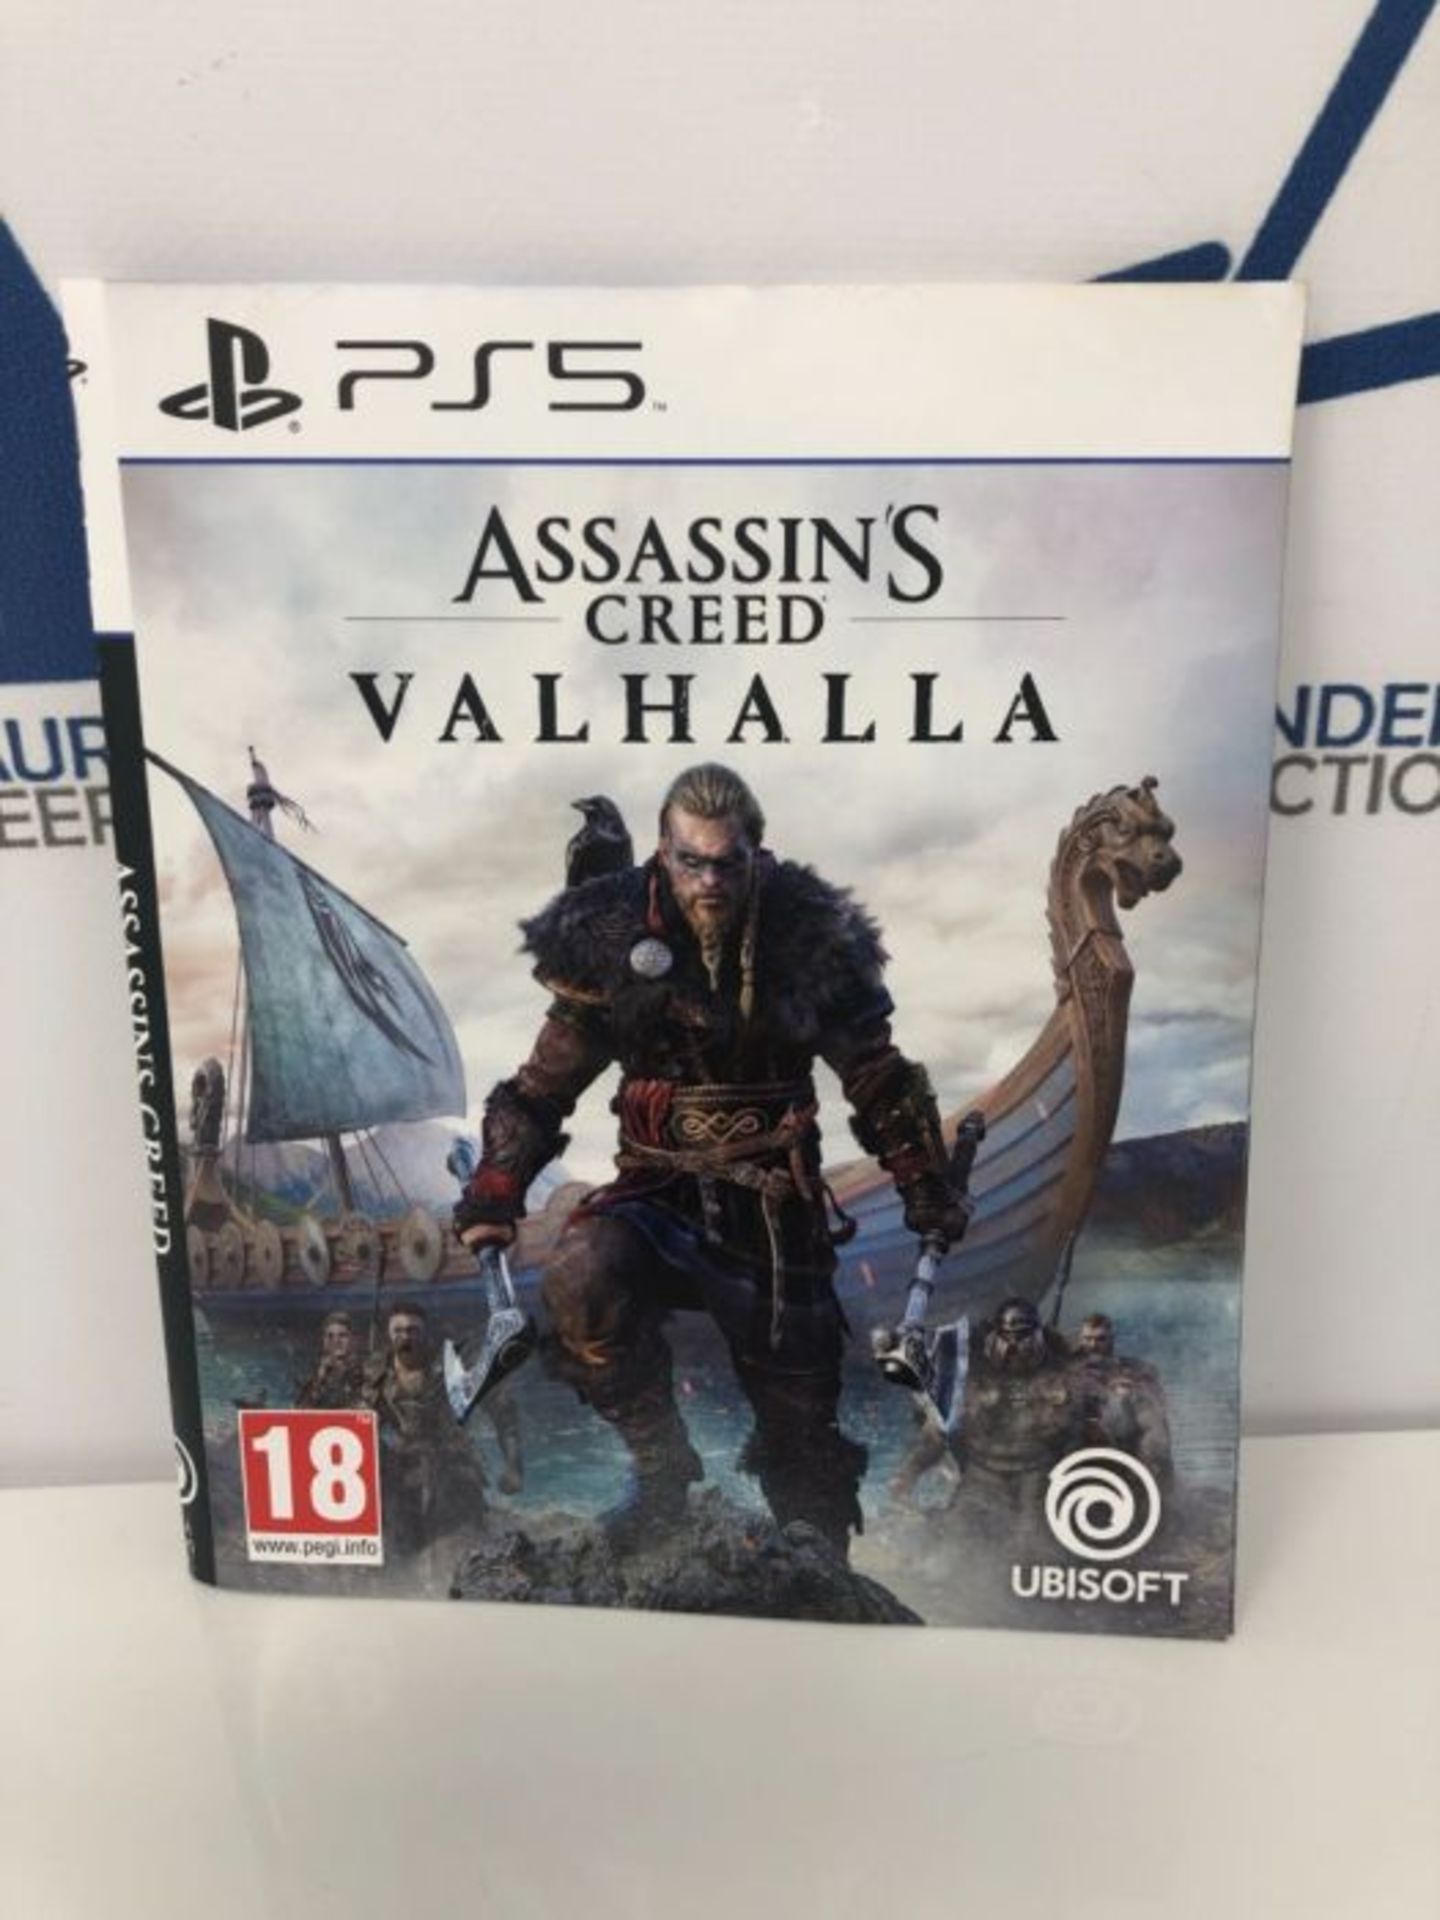 Assassin's Creed Valhalla - Image 2 of 3